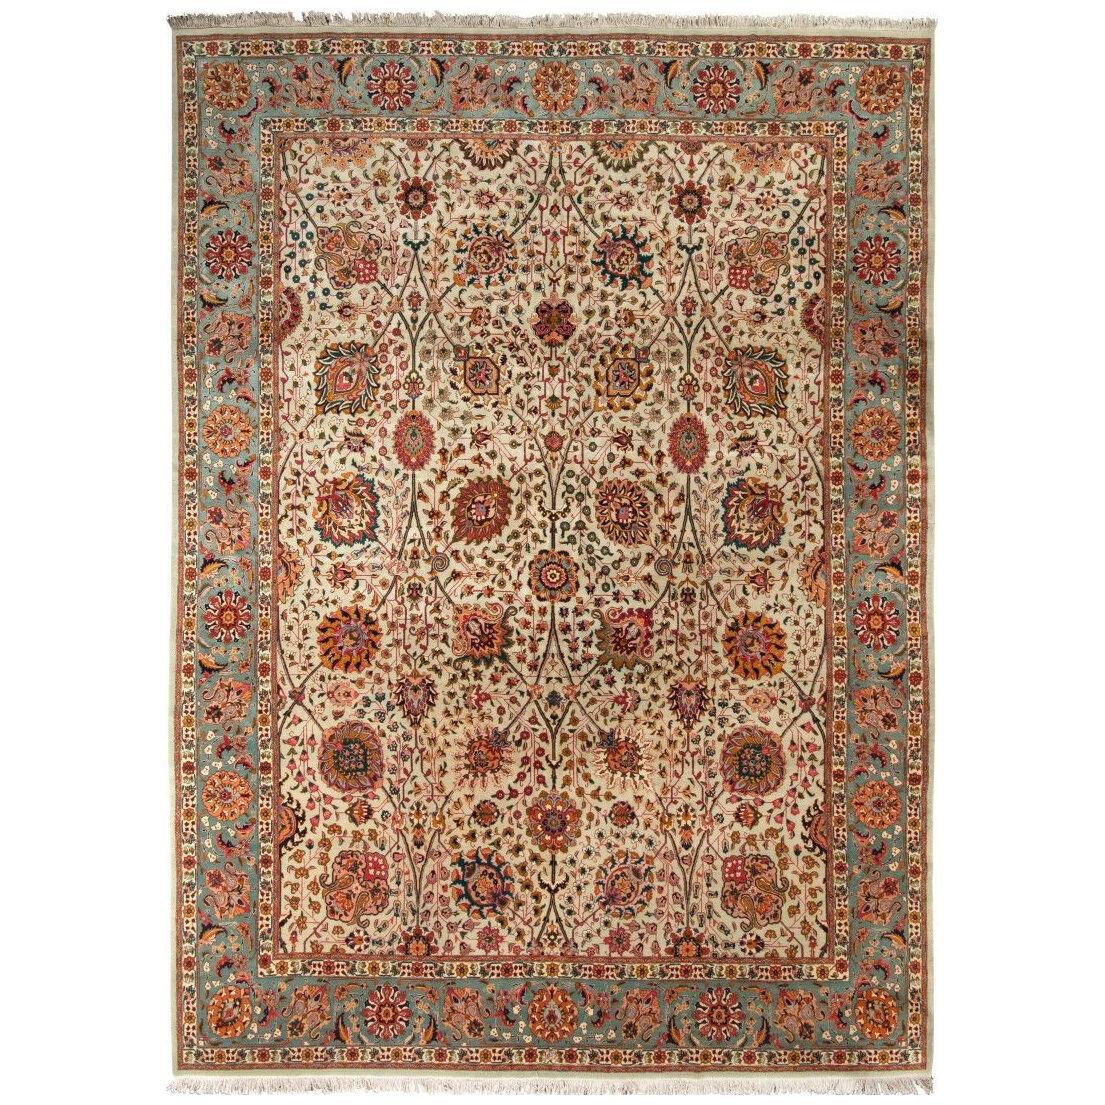 Hand-Knotted Vintage Tabriz Persian Rug In Green And Beige-Brown Floral Pattern